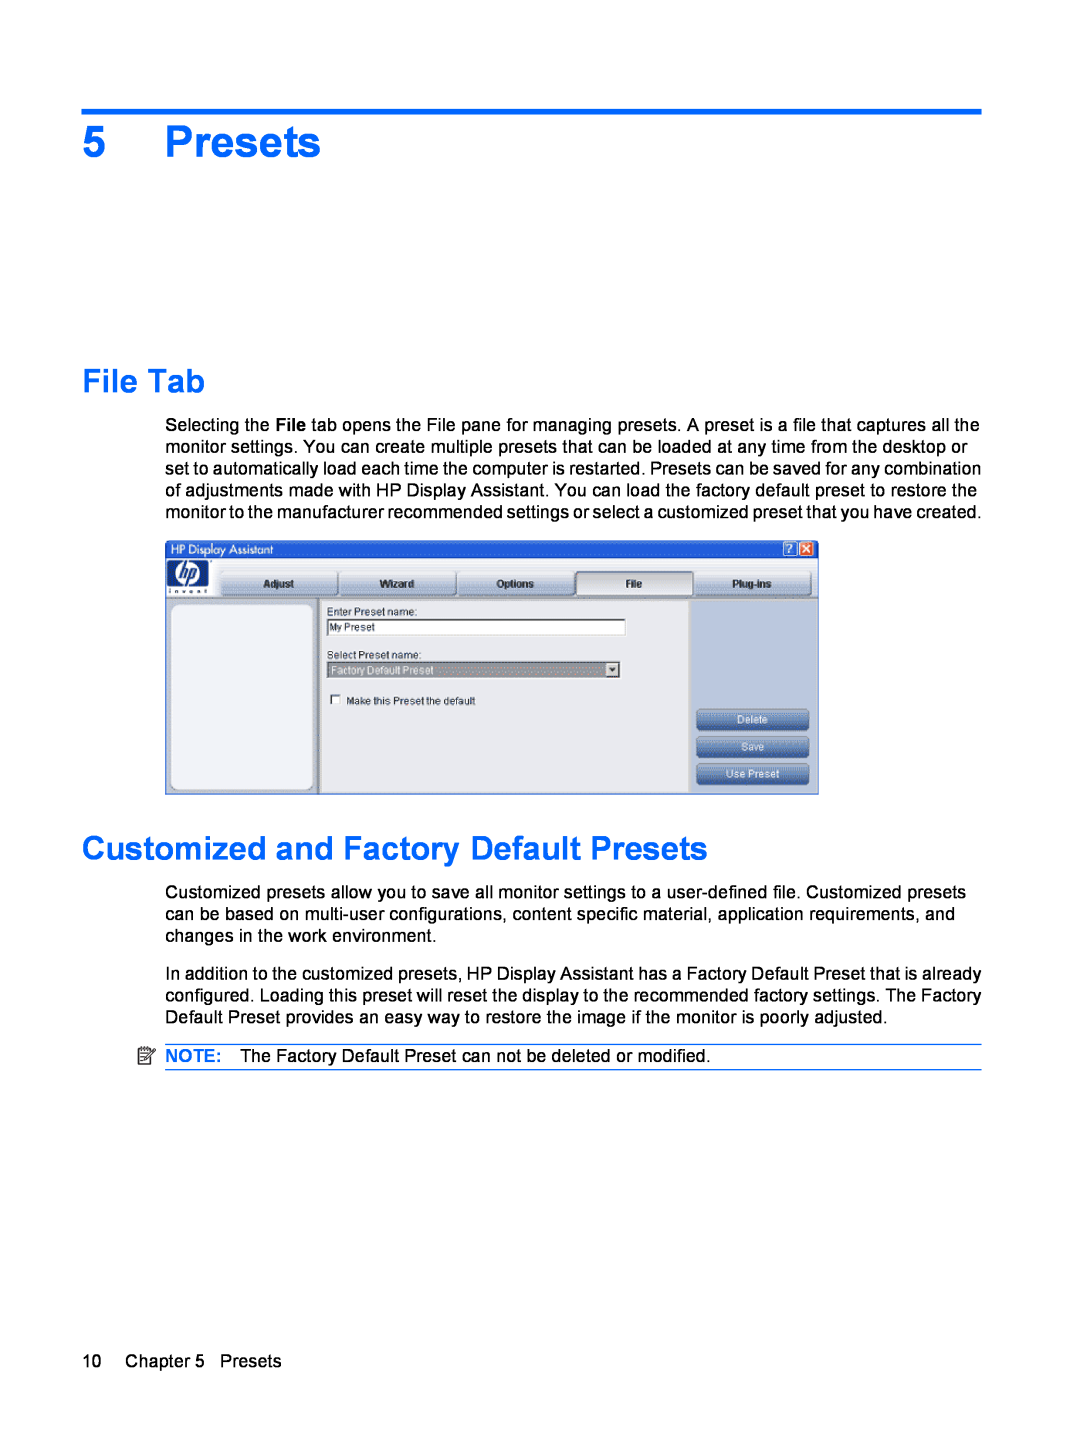 HP L1950 19-inch manual File Tab, Customized and Factory Default Presets 